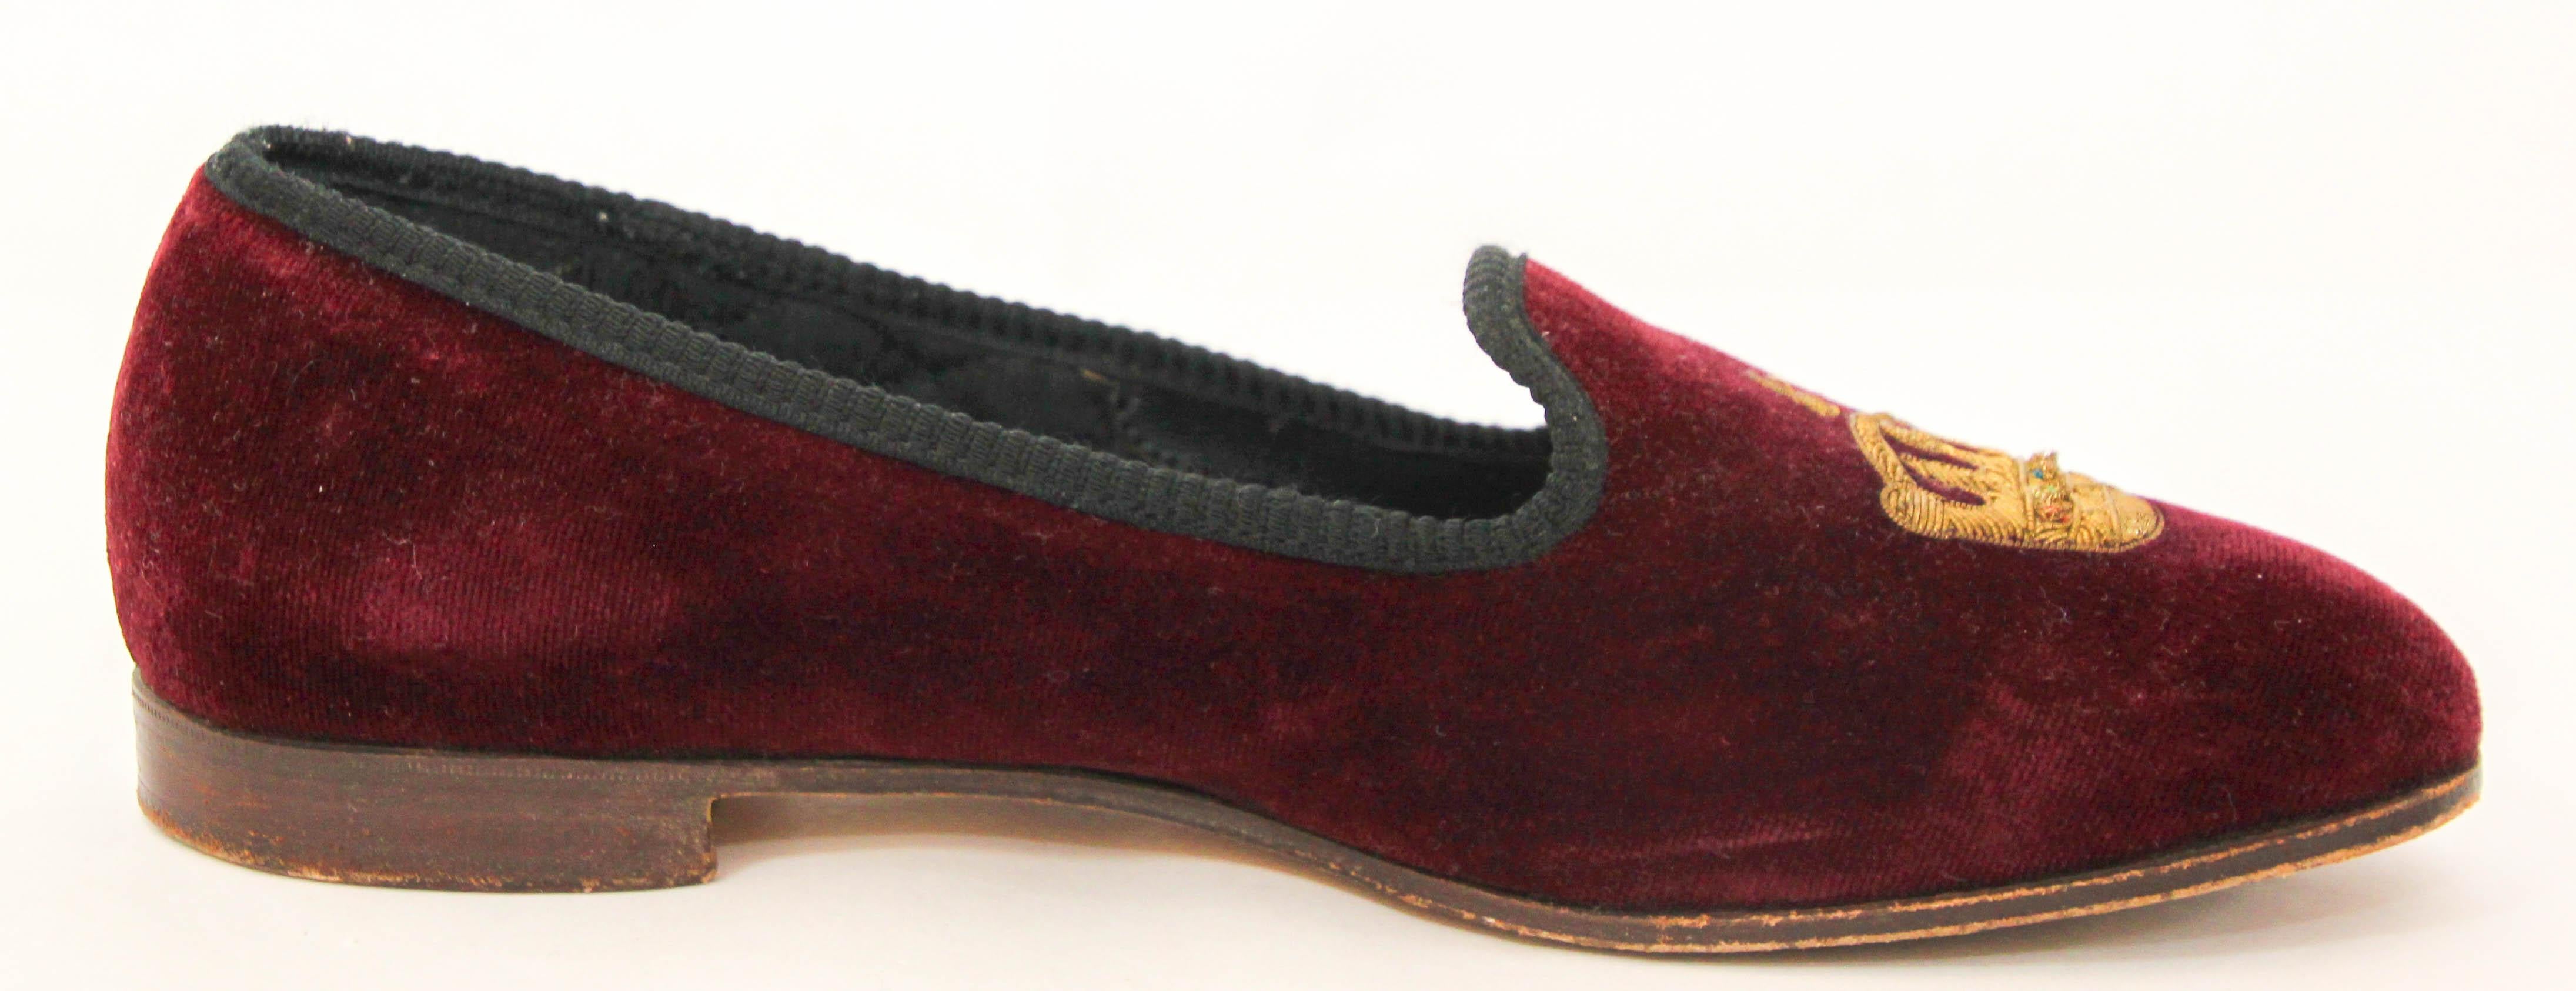 British Crown Embroidery Velvet Burgundy Loafers Slip On Size 6.5 For Sale 7